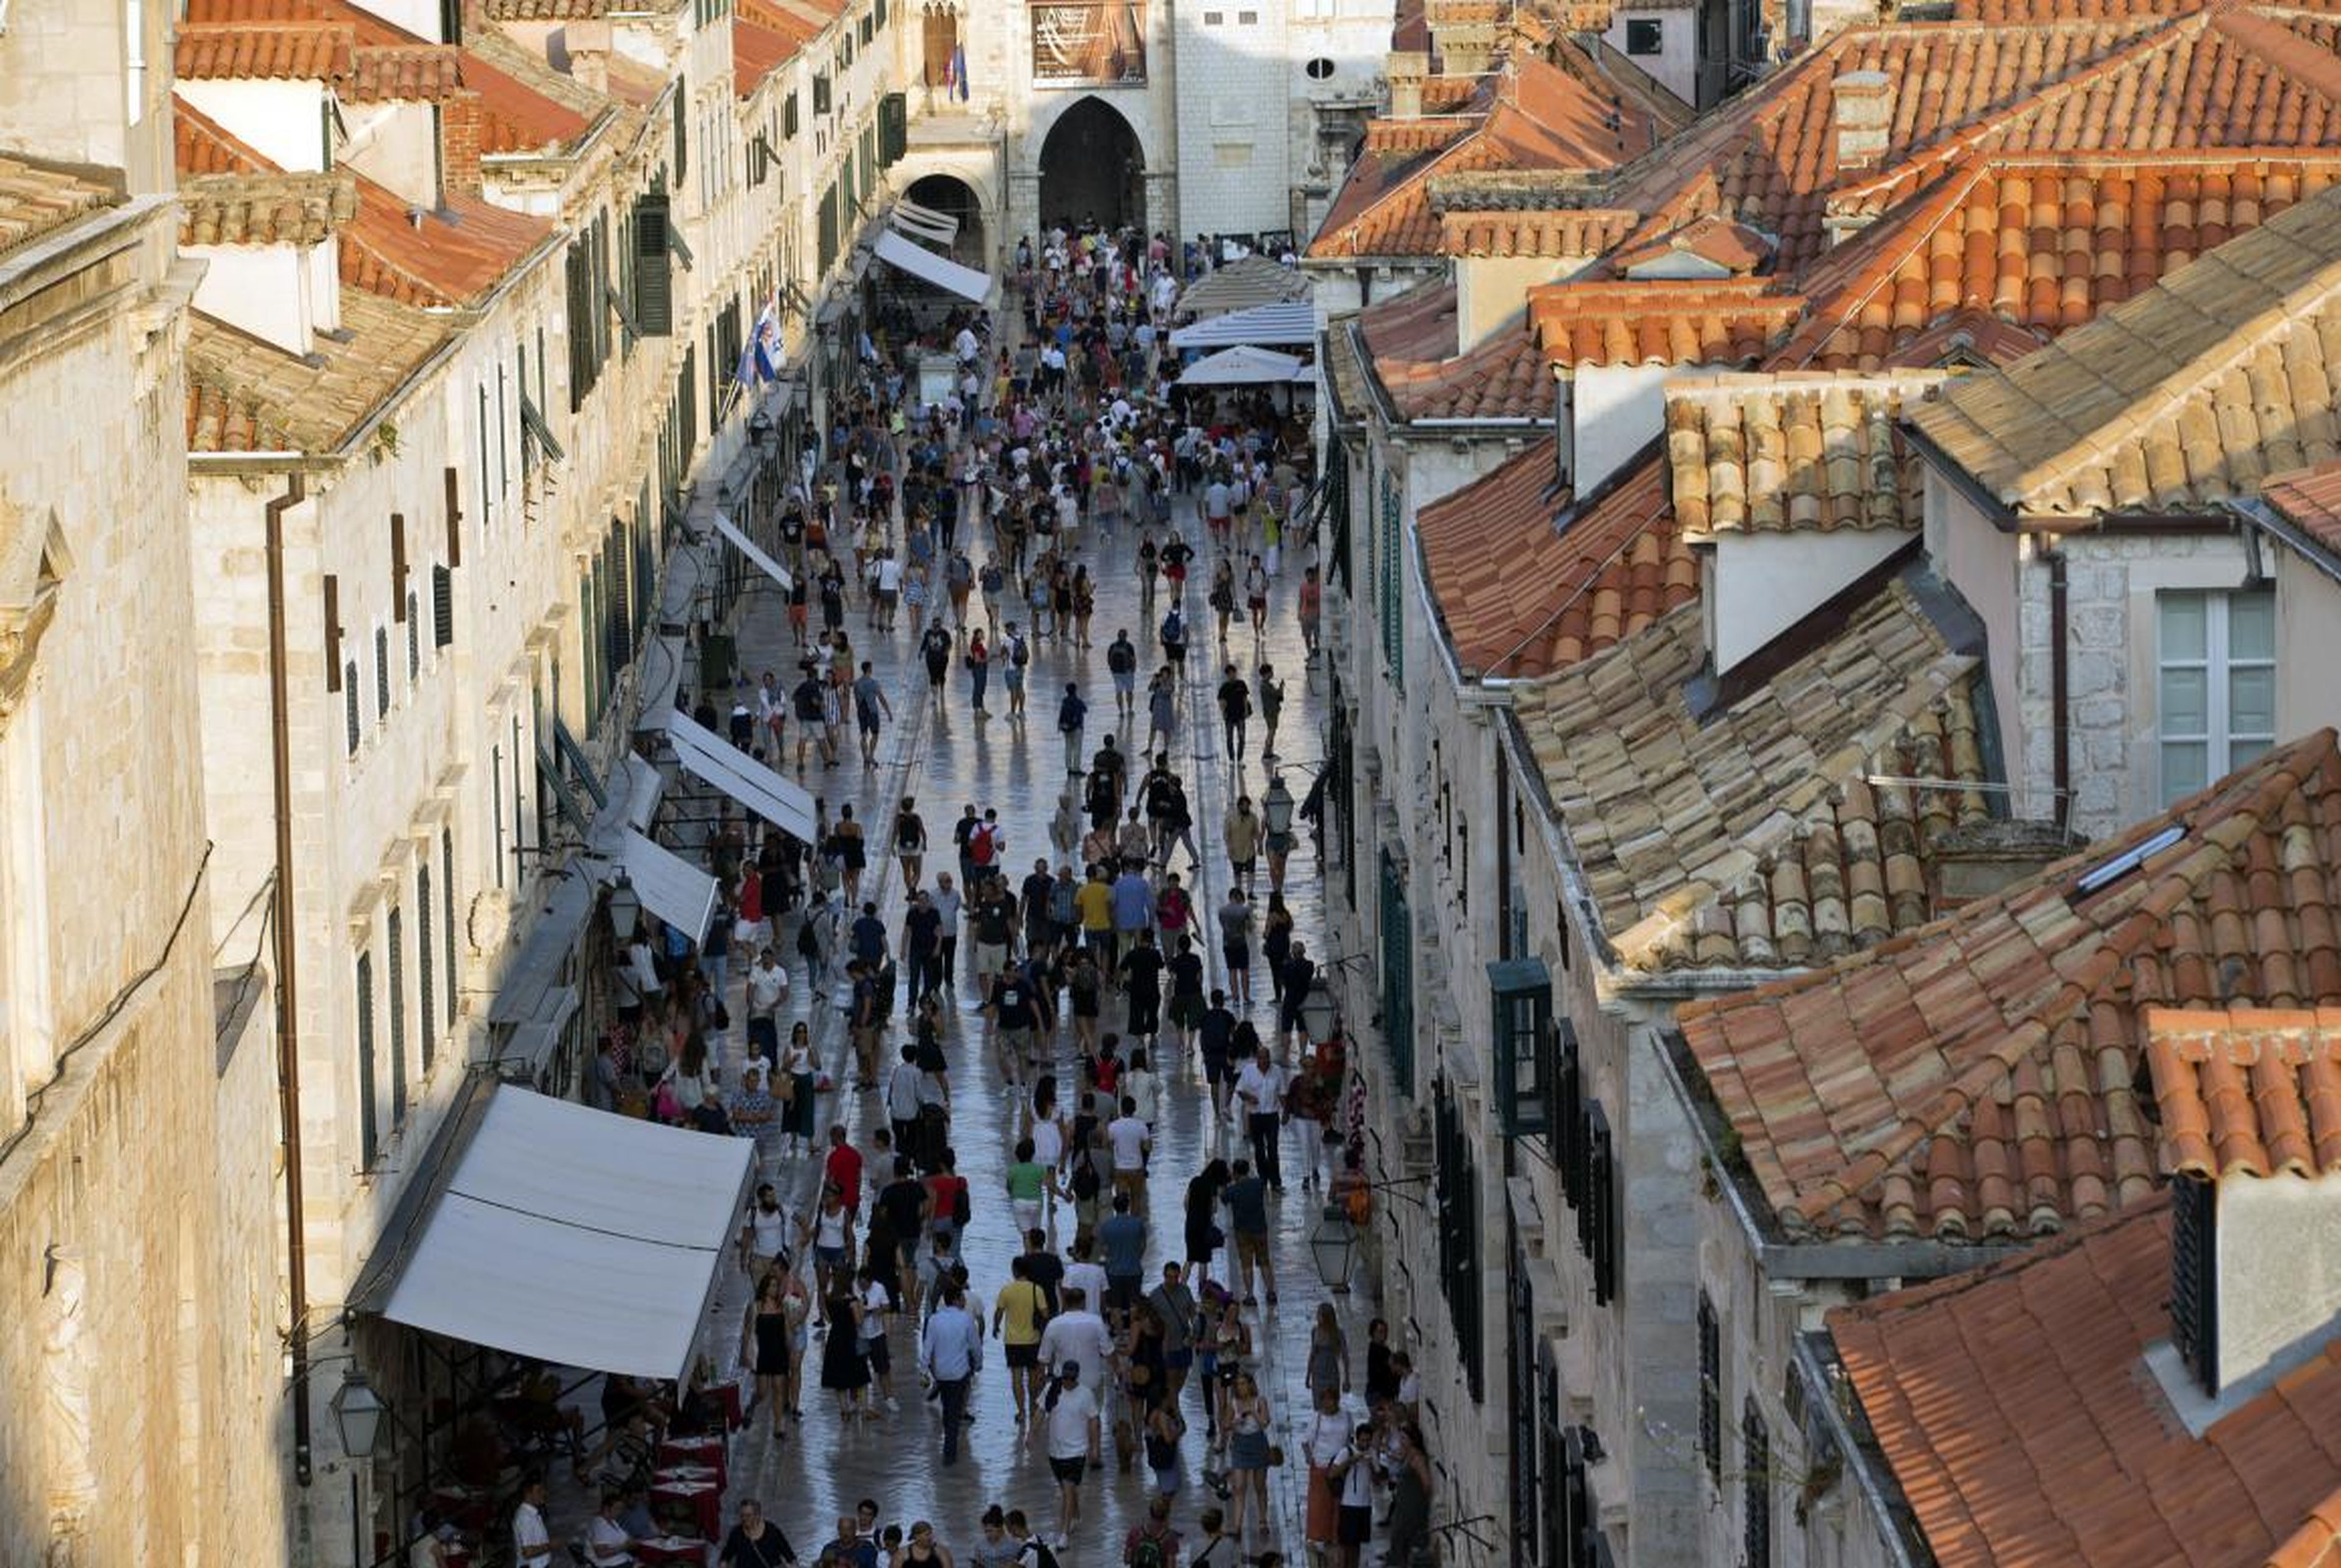 Tourists in Dubrovnik's old town in September 2018.